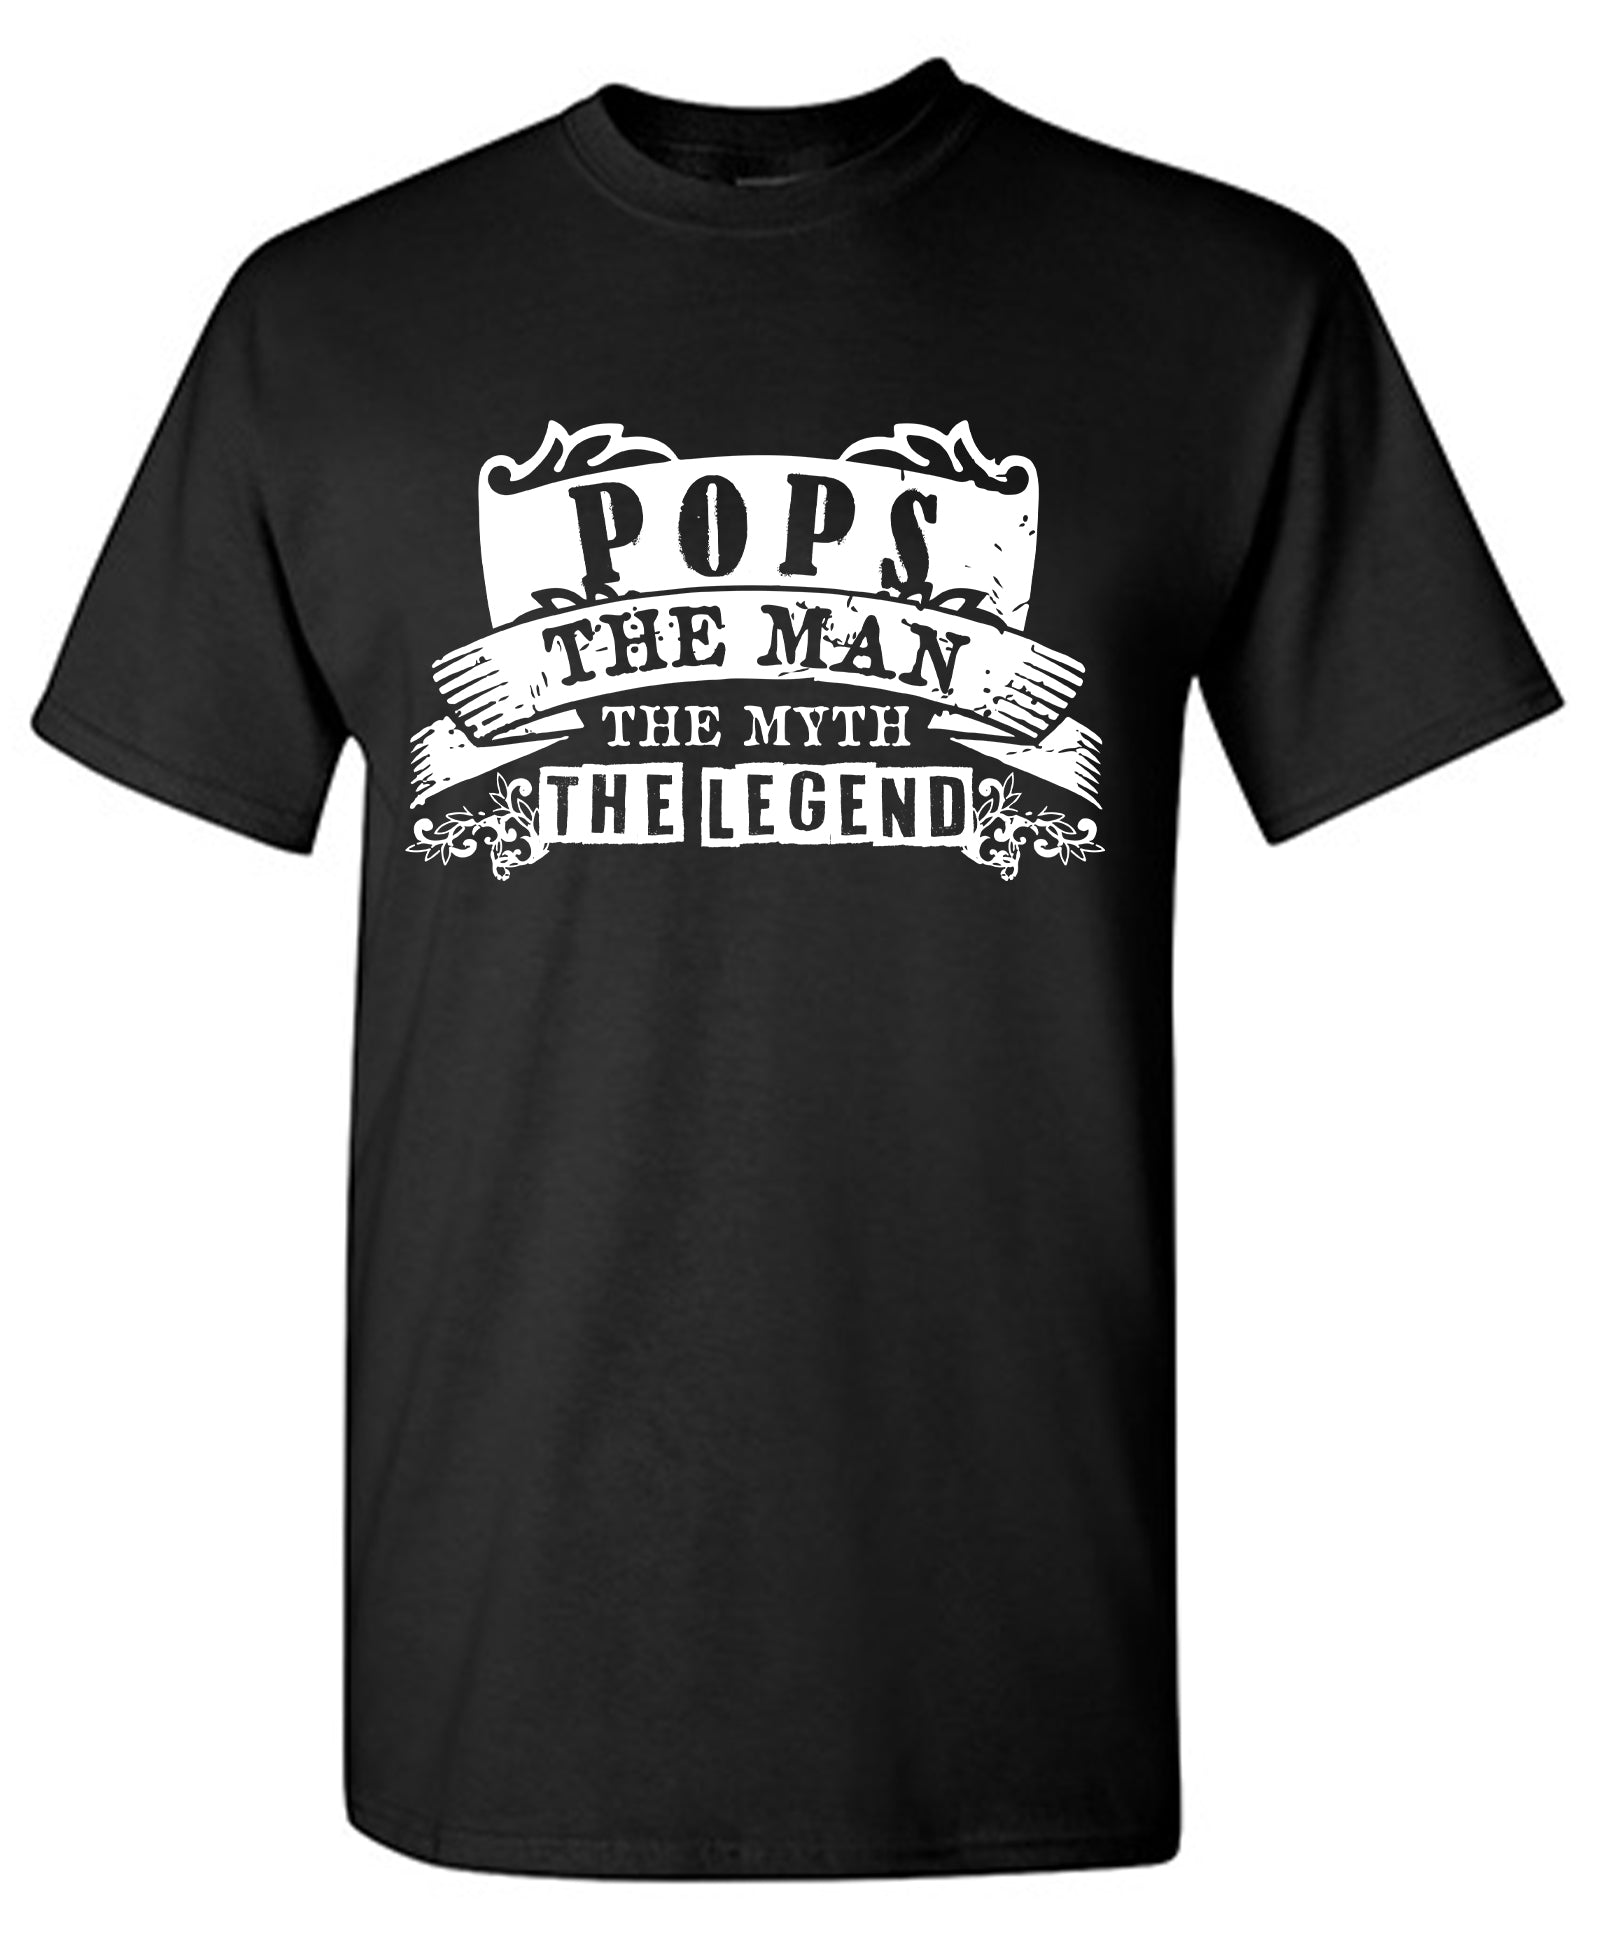 Pops, The Man, The Myth, The Legend T-Shirt. Roadkill T-Shirts: Hilariously Funny Novelty Graphic T Shirts